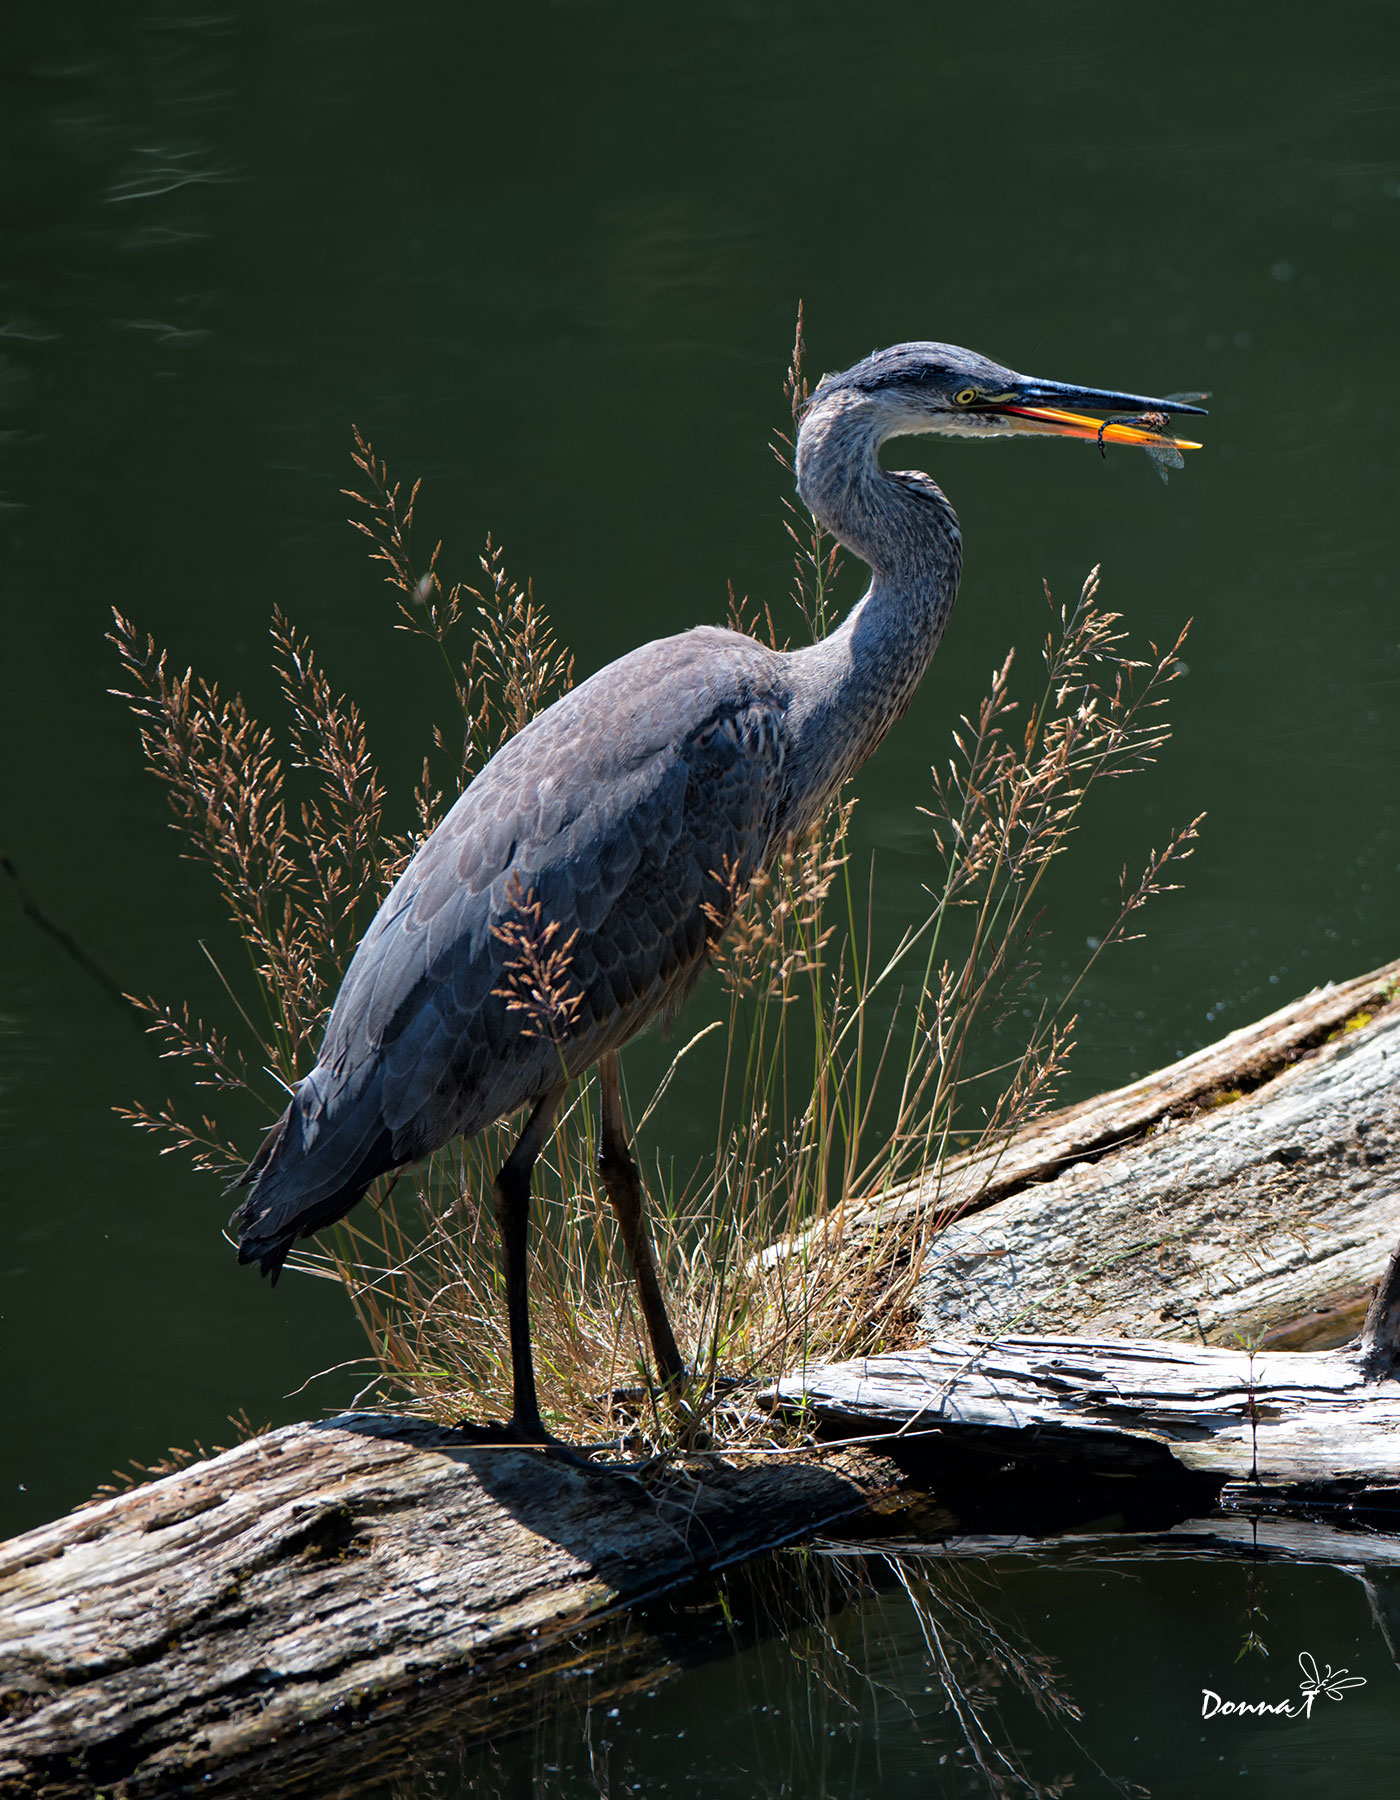 The Heron & Dragonfly